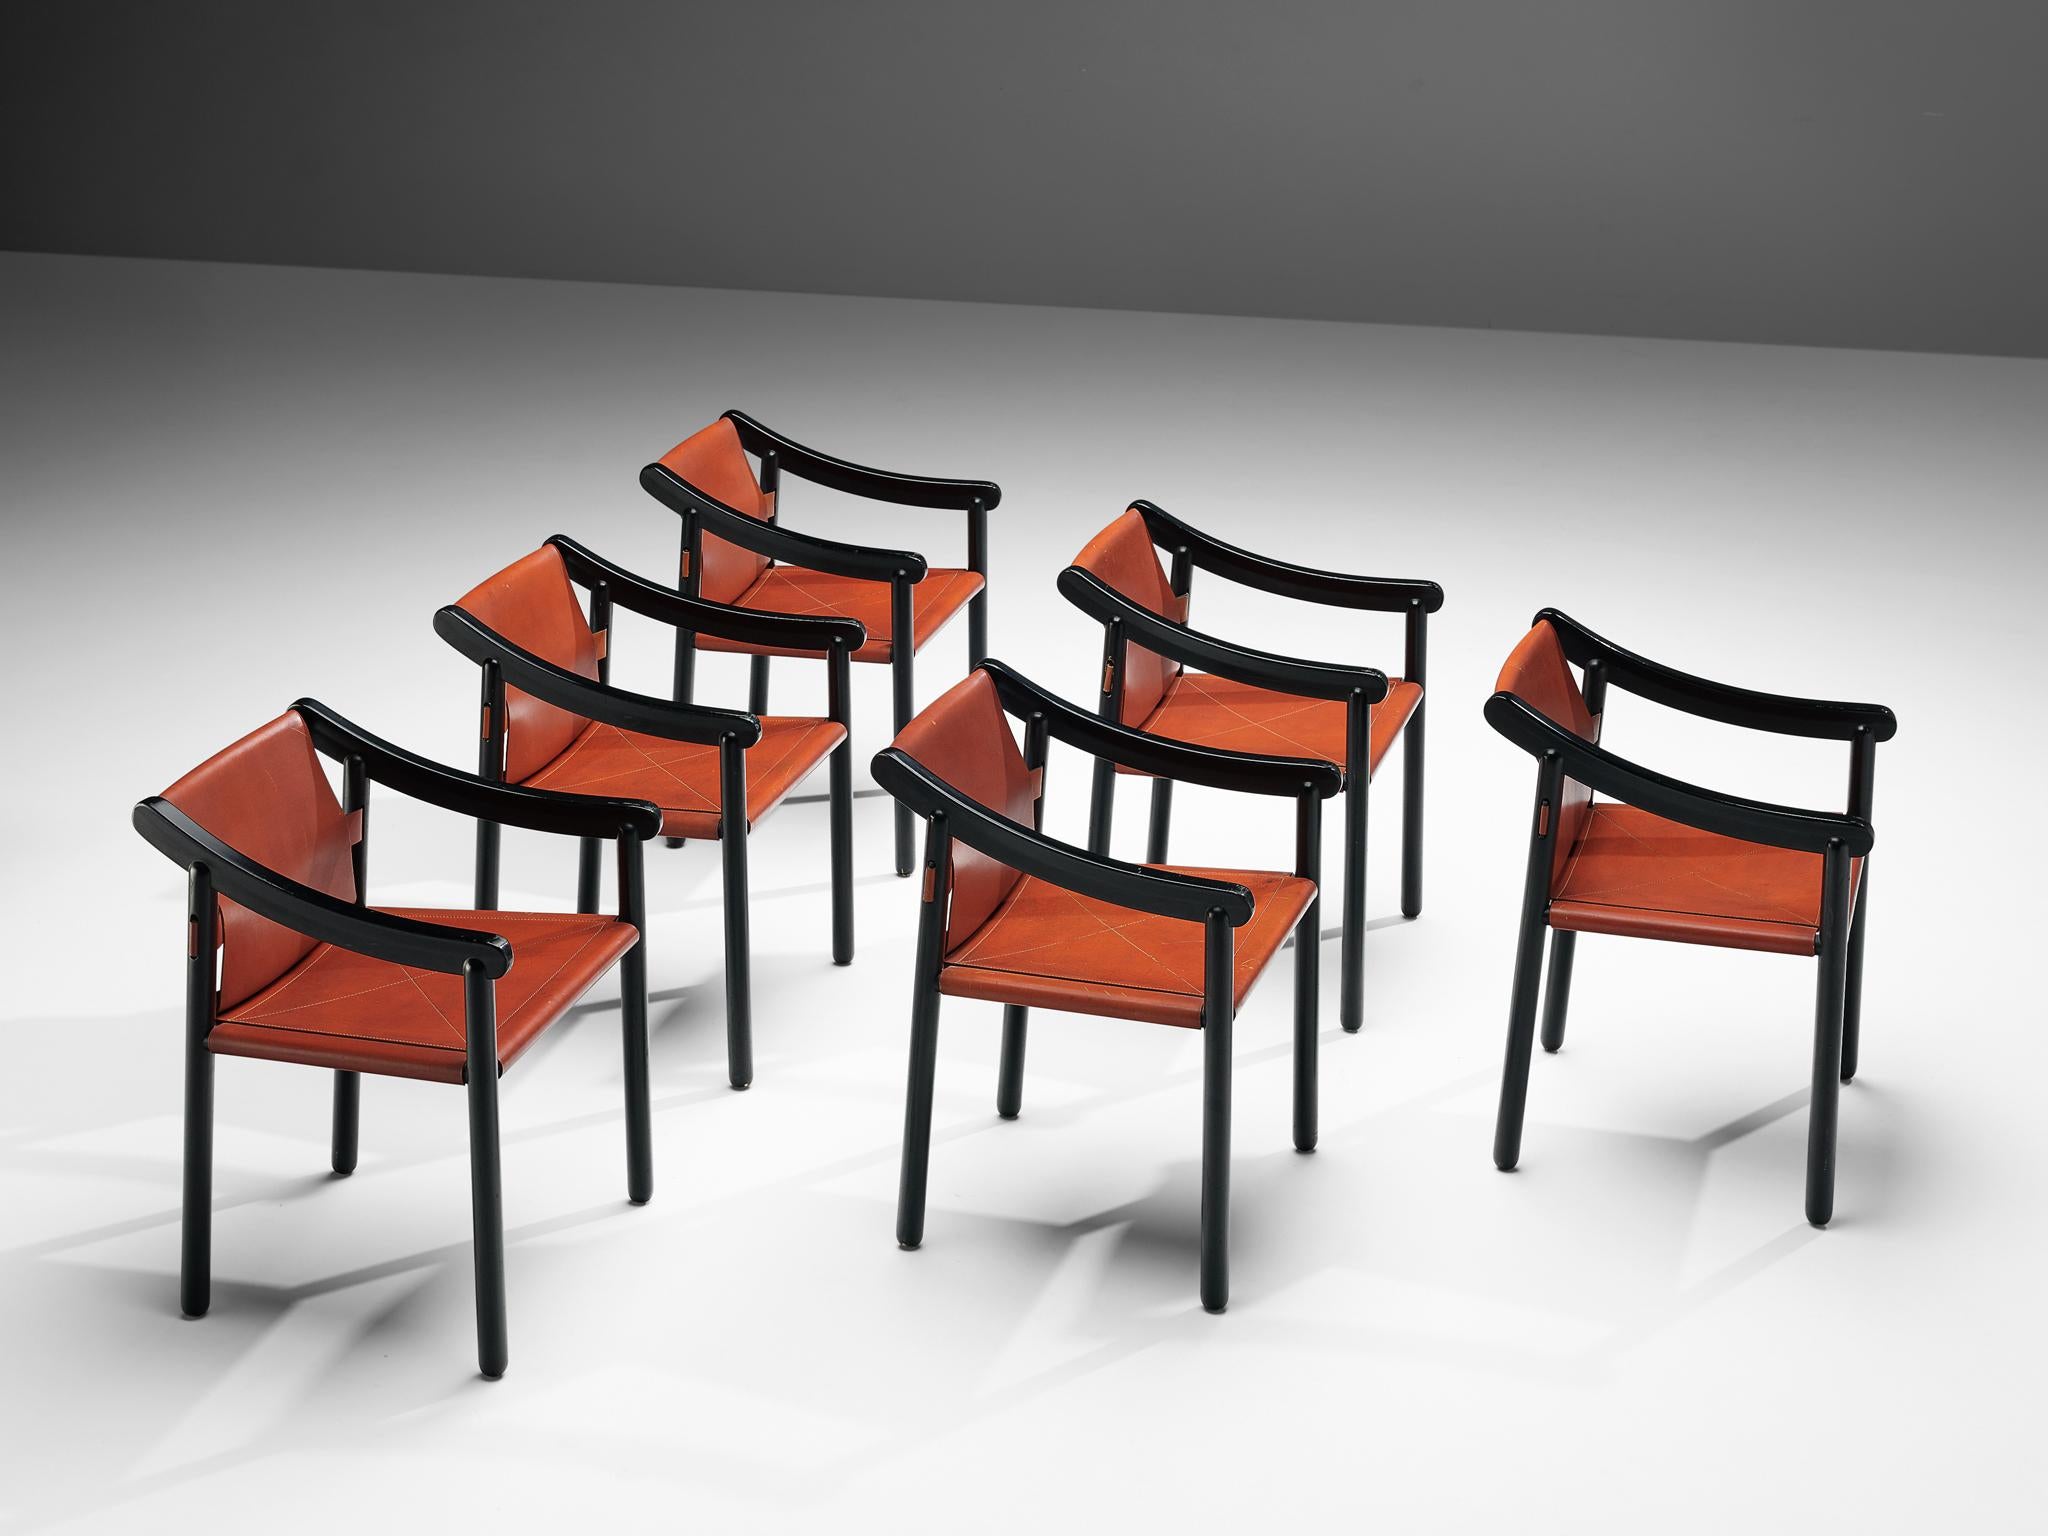 Vico Magistretti for Cassina, set of six '905' armchairs, black lacquered wood and red leather, Italy, 1964.

Designed by Vico Magistretti and produced by Cassina, this set of chairs features the original elements of this early '905' model. The